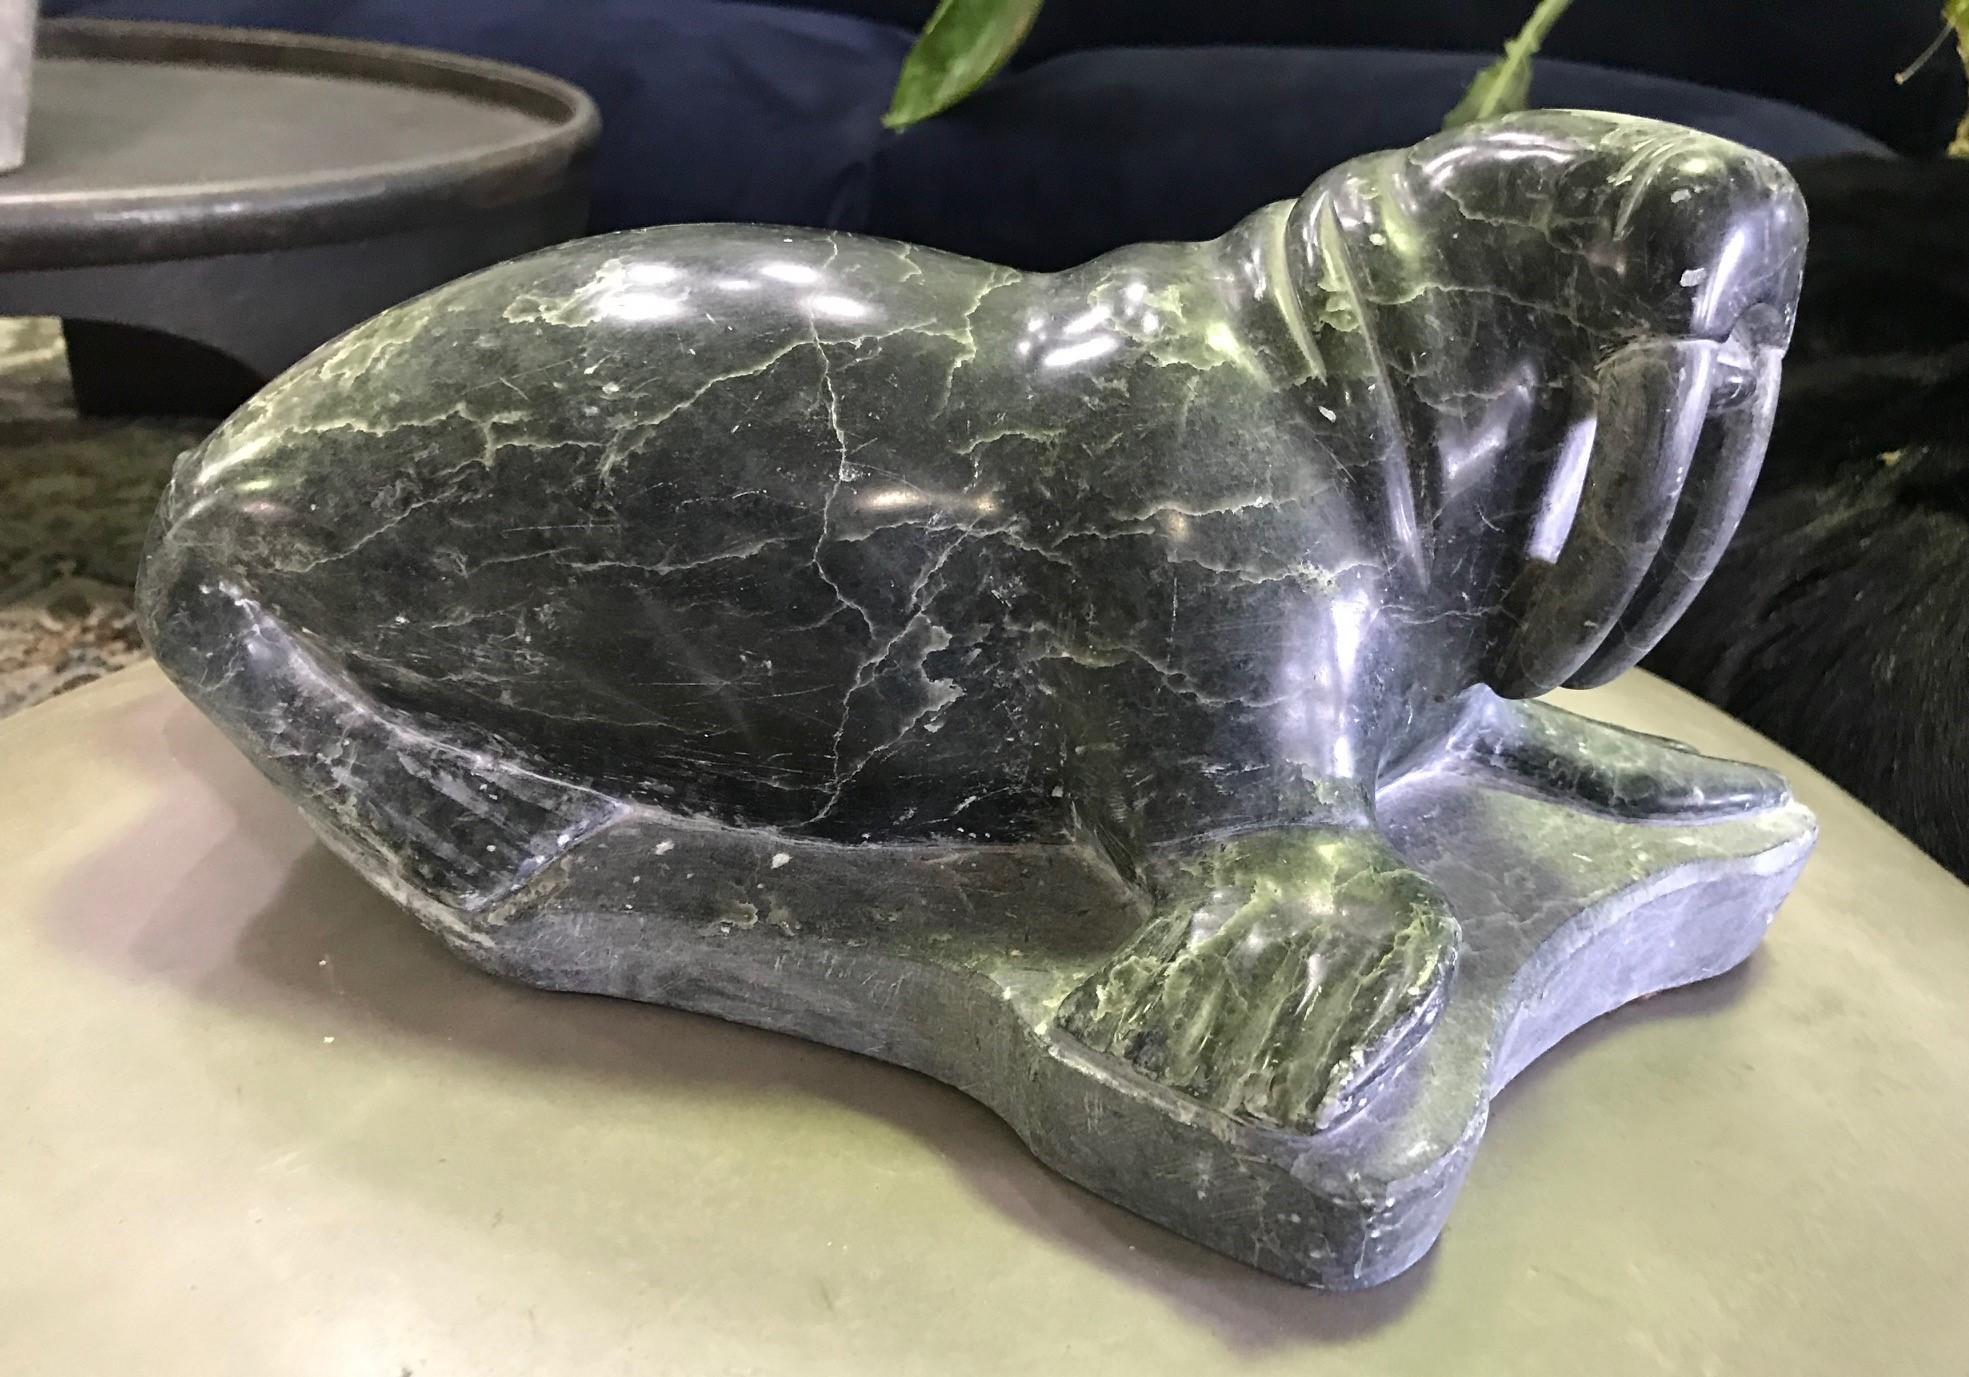 A wonderful soapstone large, heavy carving of a tusked walrus by the indigenous inuit people who inhabit parts of the Arctic regions of Greenland, Canada, and Alaska.

Signed on the underside.

From a collection of Native and North American